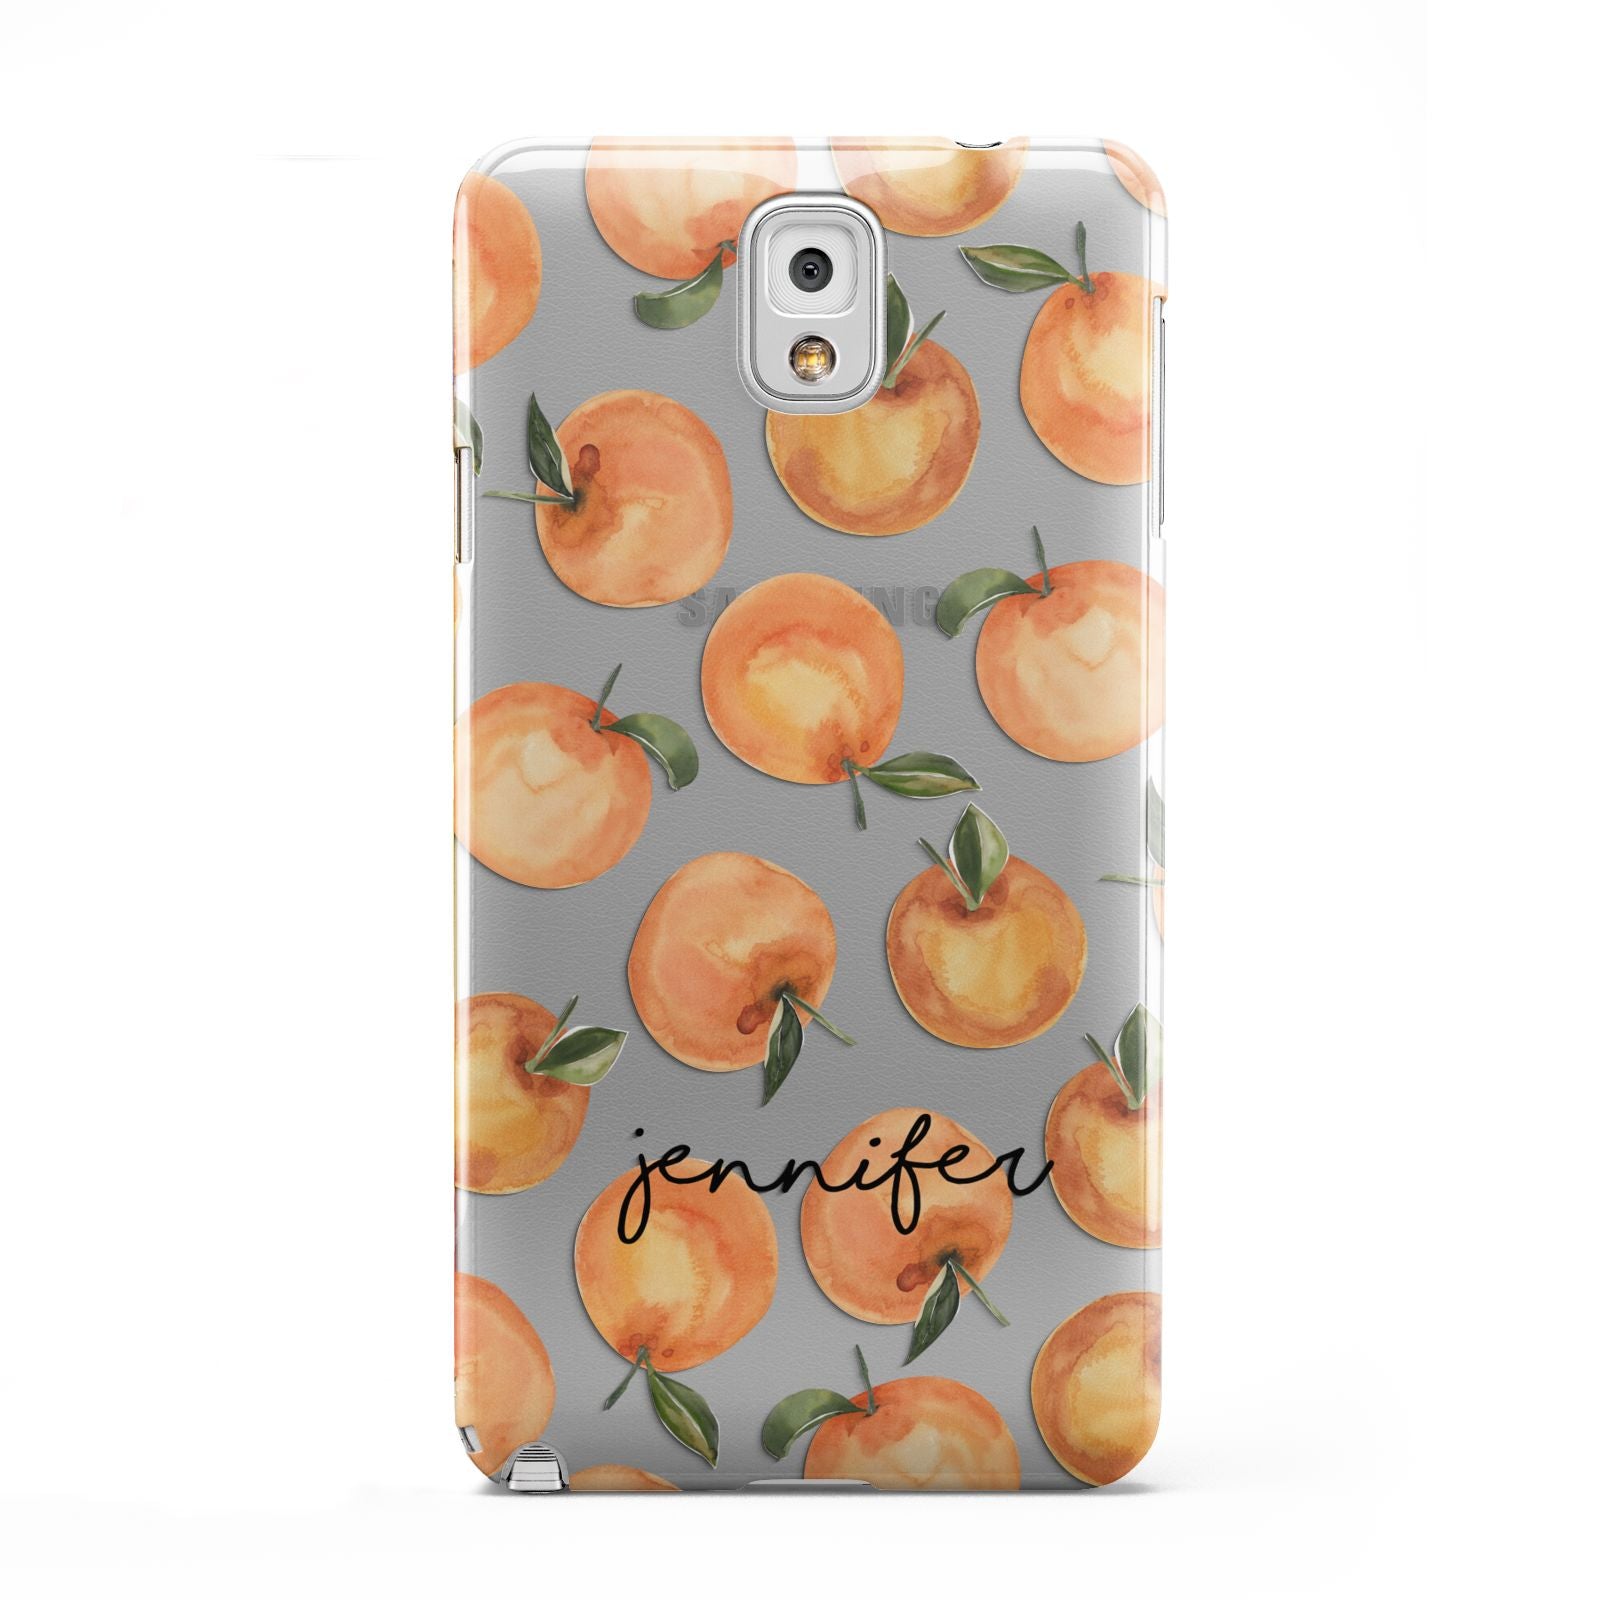 Personalised Oranges Name Samsung Galaxy Note 3 Case